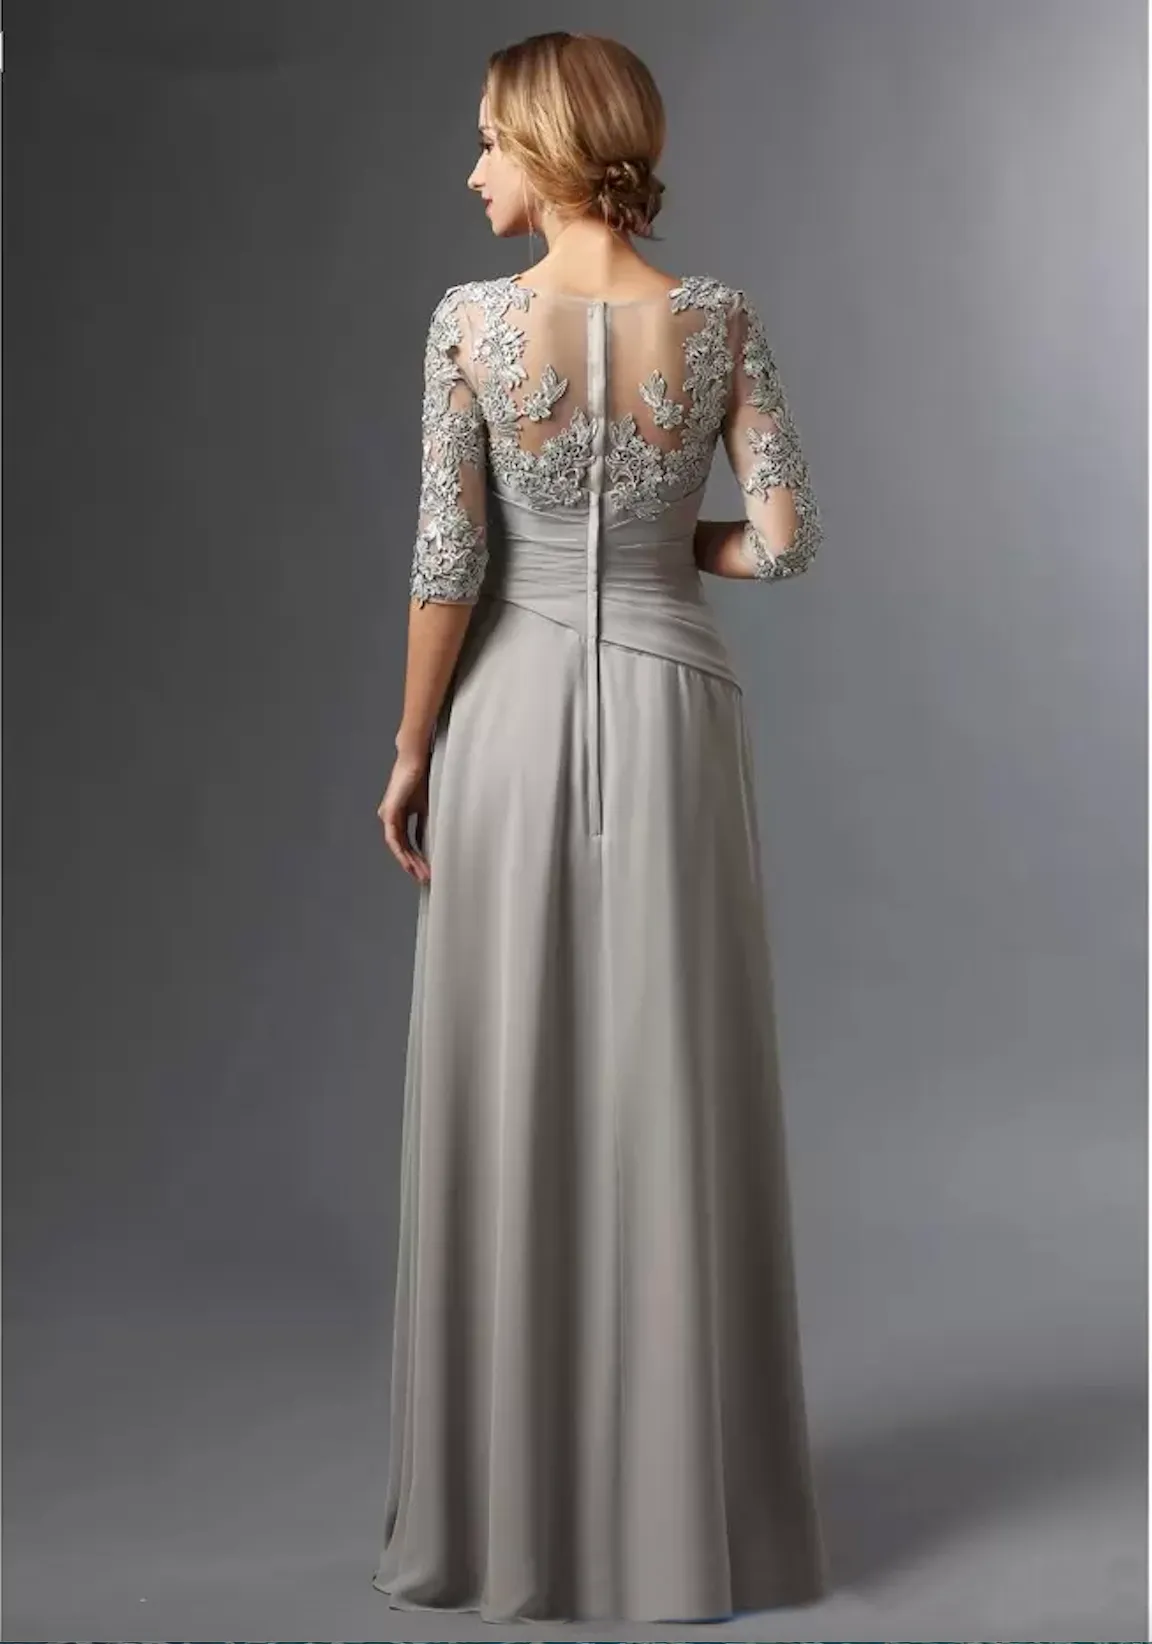 New Silver Mother Of The Bride Dresses A-line Half Sleeves Chiffon Lace Plus Size Long Elegant Groom Wedding Party Gown